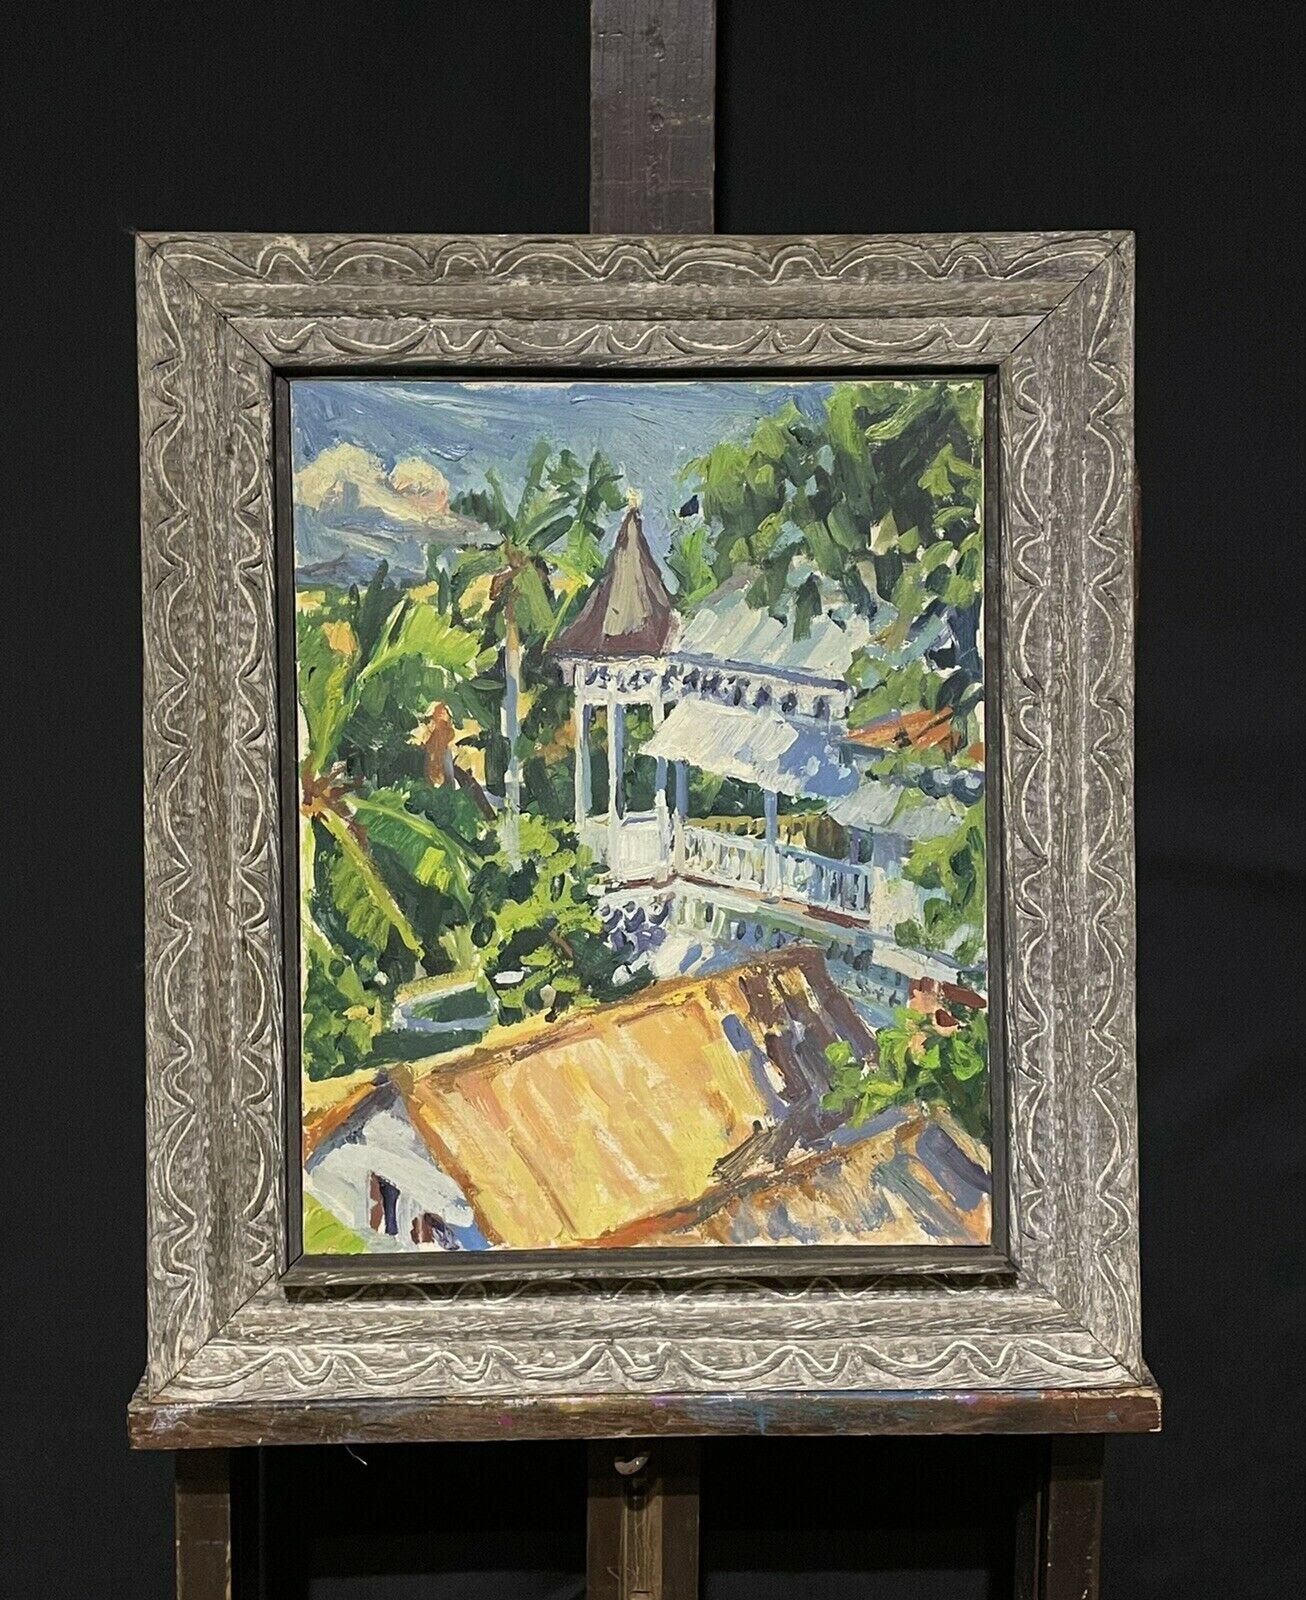 Artist/ School: American School, mid 20th century

Title: Garden Landscape view

Medium:  oil painting on canvas, wood framed 

framed: 27.25 x 23.25 inches
canvas:  20 x 16 inches

Provenance: private collection, UK

Condition: The painting is in